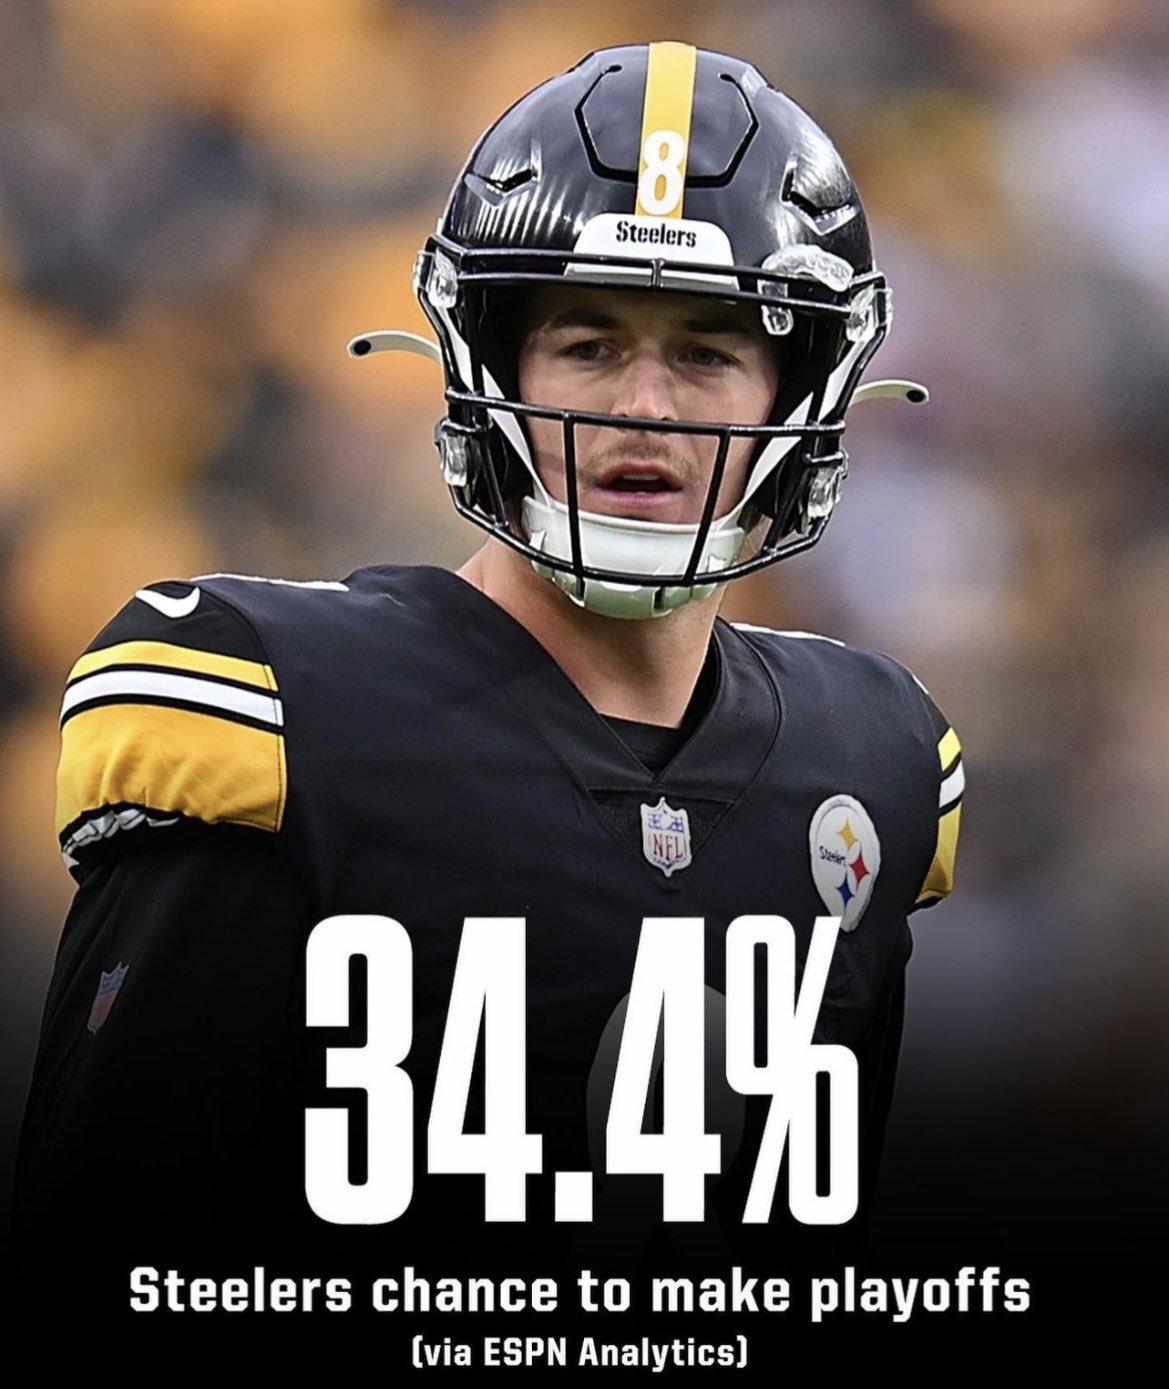 ESPN on X: The Steelers have been eliminated from playoff